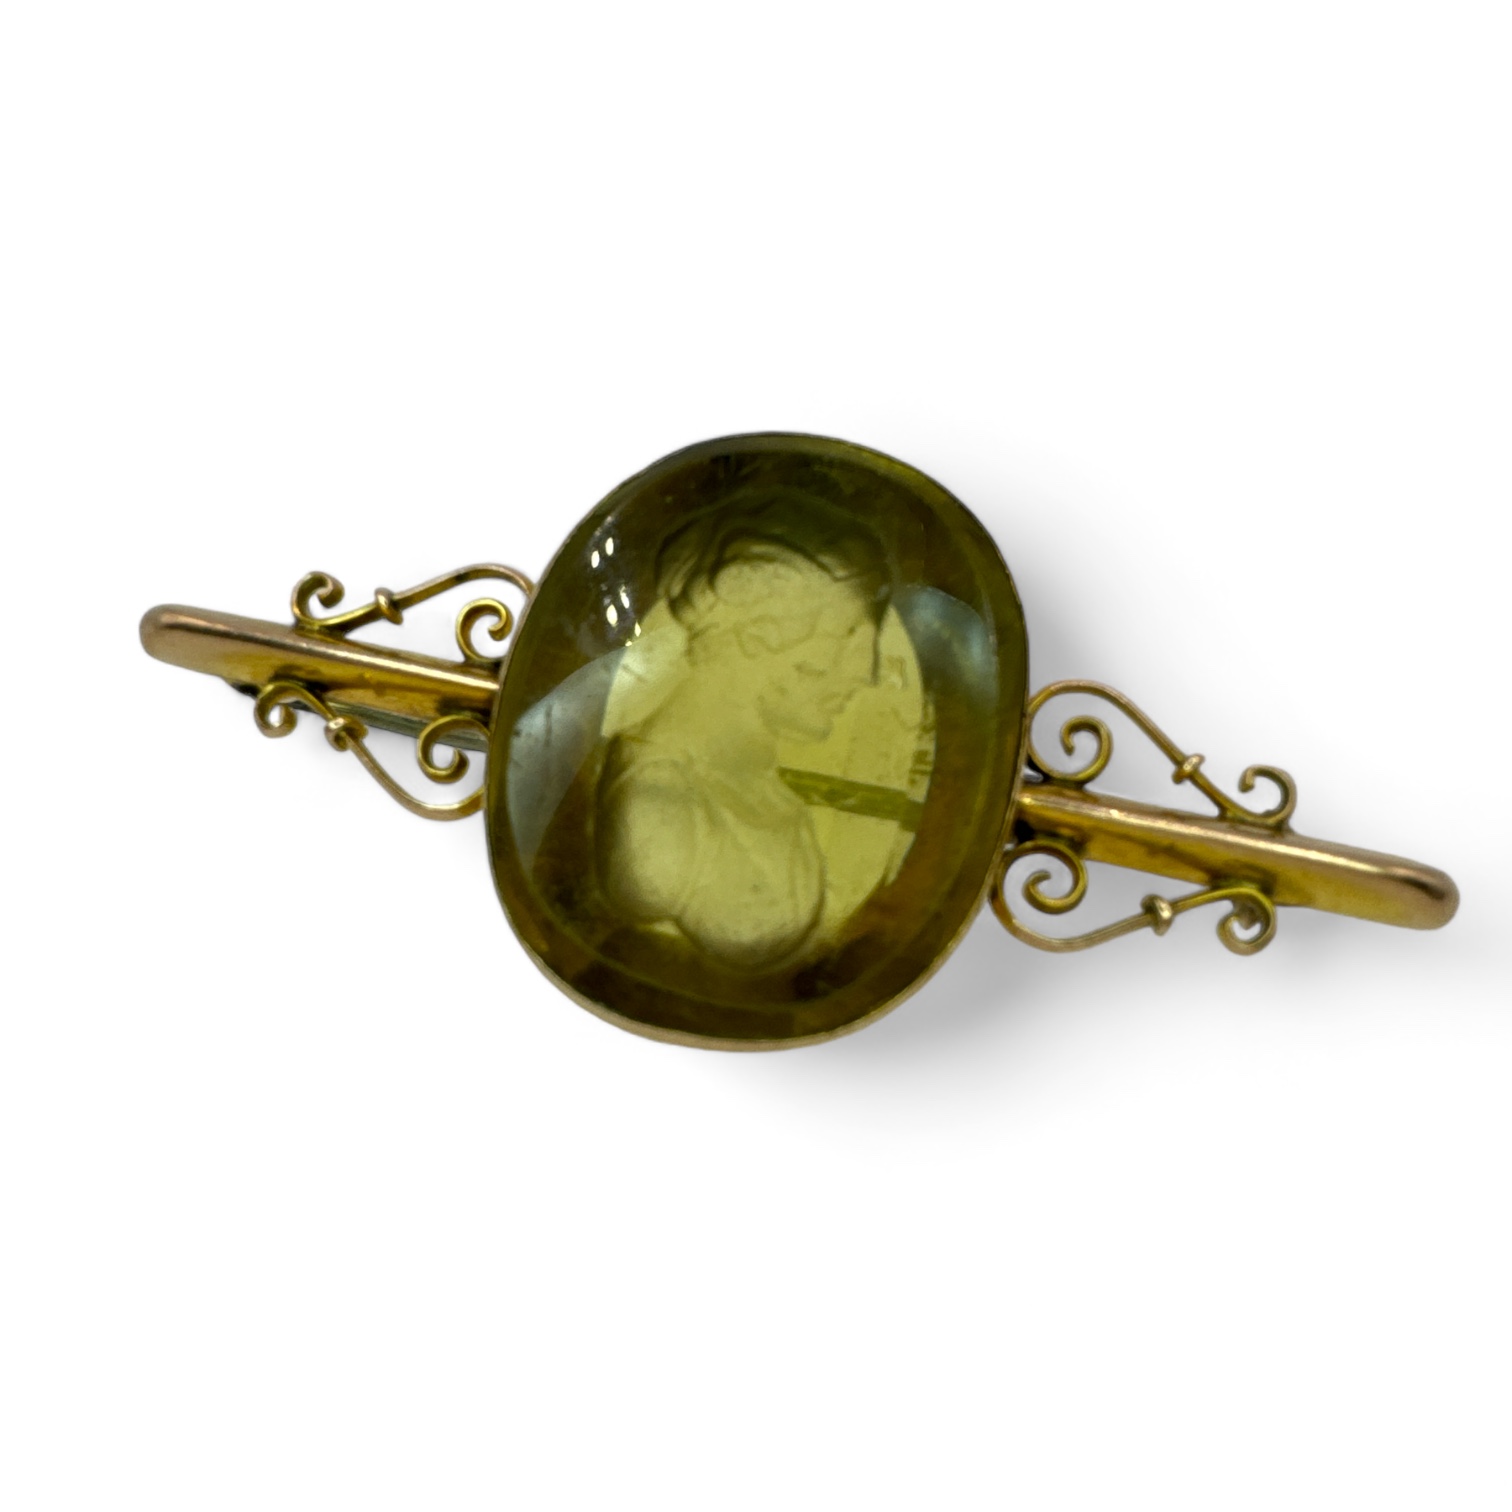 An antique glass intaglio in a "9c" stamped brooch mount. The greenish-yellow moulded gem features a